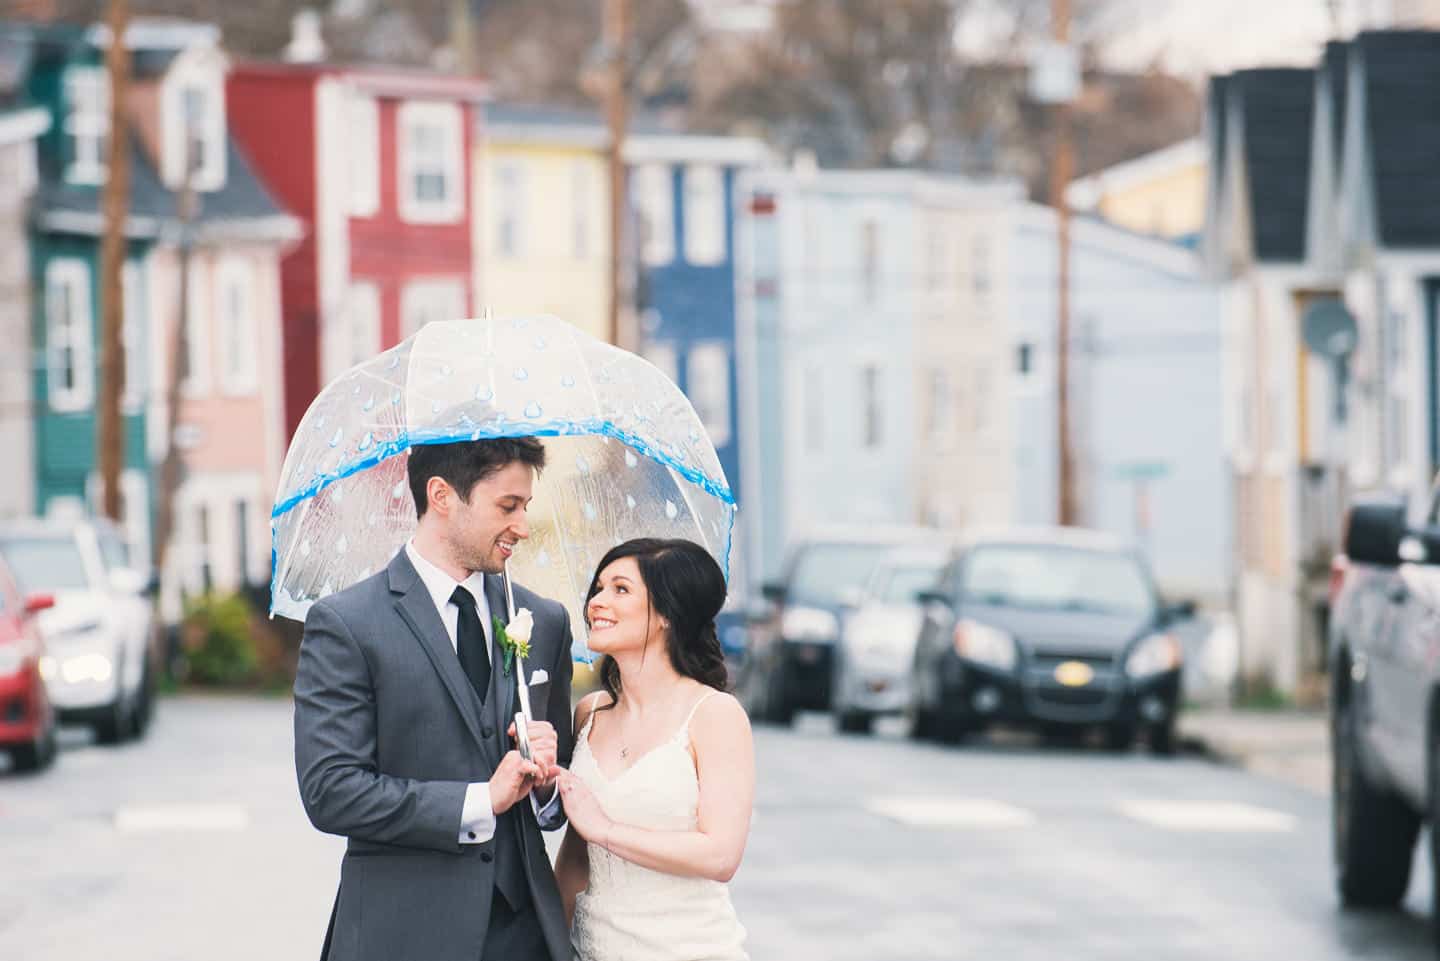 A picture of a bride and groom holding hands in scenic downtown St. John's, Newfoundland, Canada